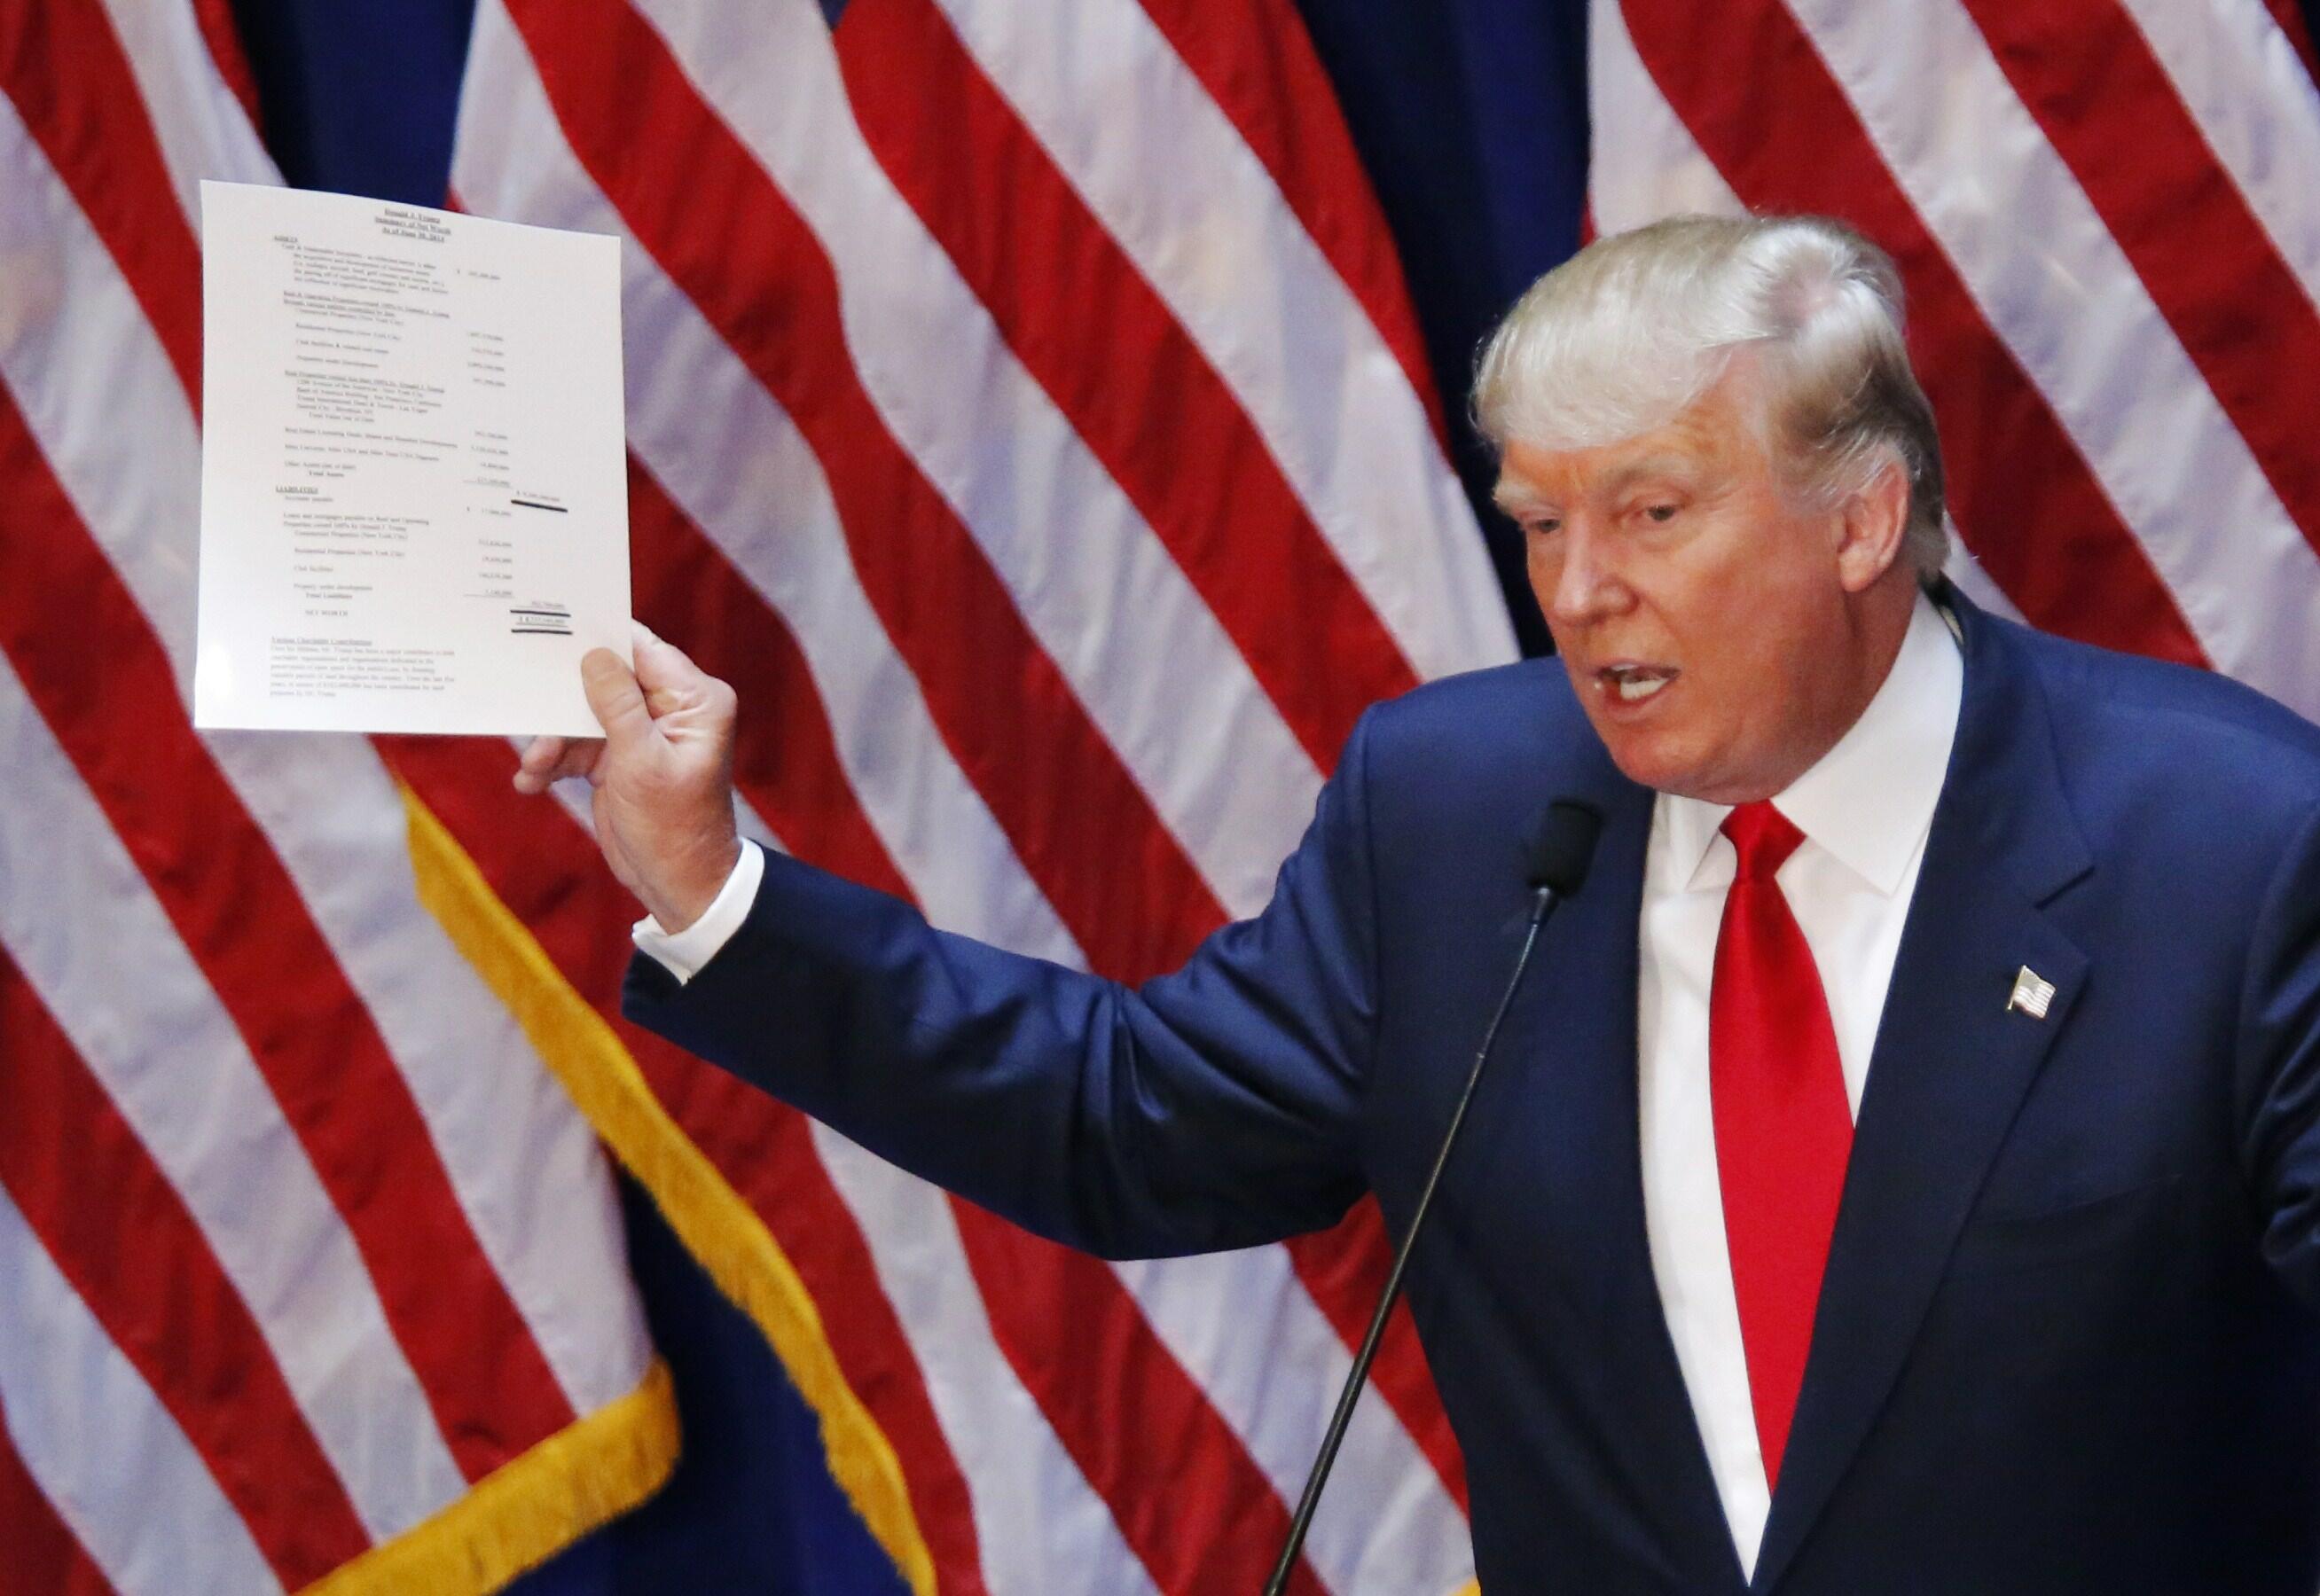 Real estate investor Donald Trump displays his financial statement during his announcement that he will run for the 2016 presidential election at the Trump Tower in New York  on June 16, 2015. Trump, one of America's most flamboyant and outspoken billiona